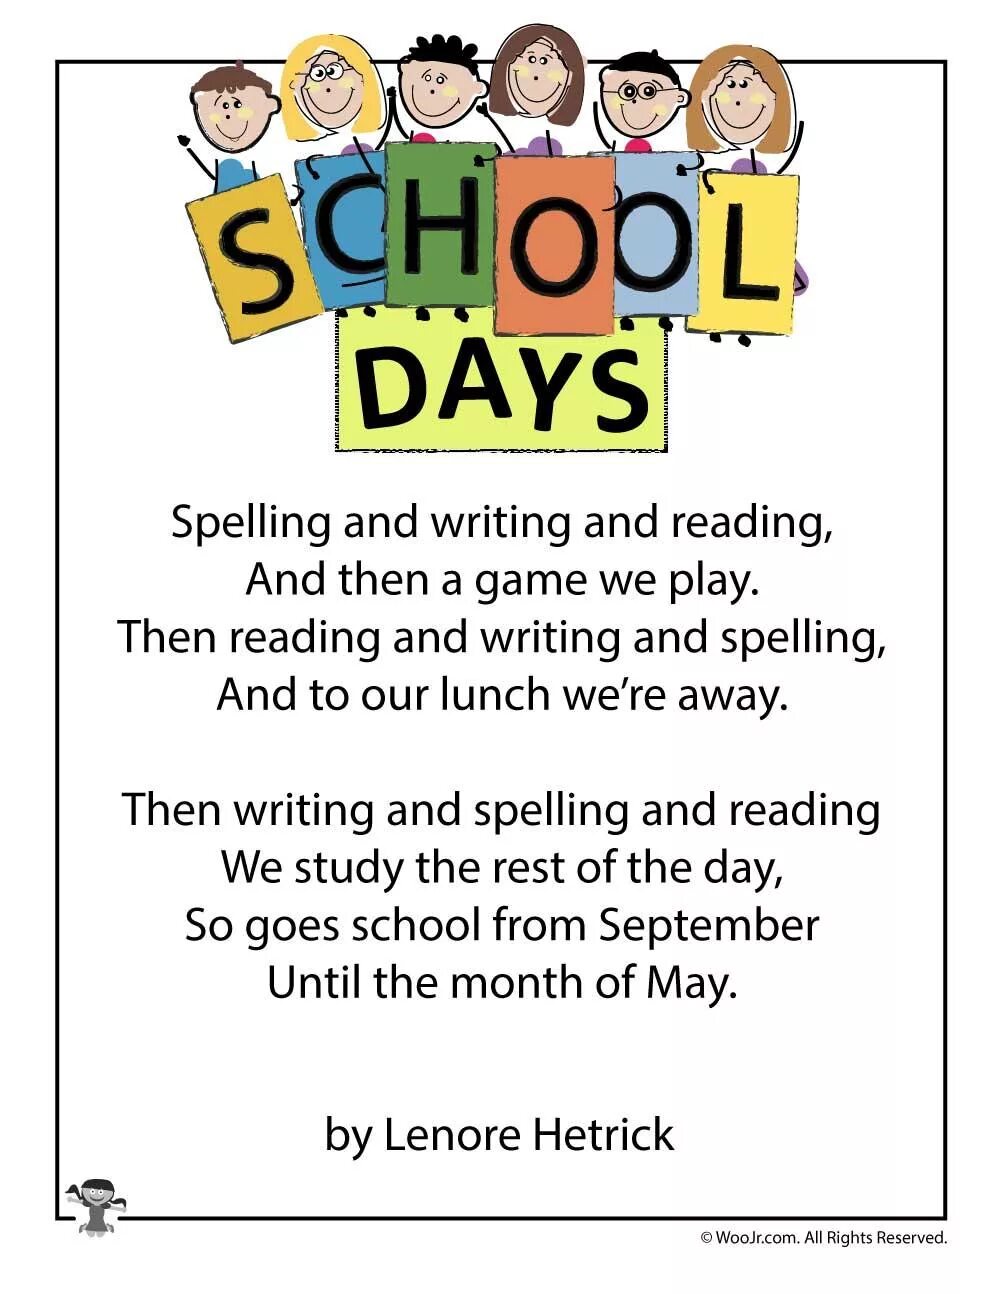 School poems for Kids. English poems about School. Poems for children in English. Poems about School for children.